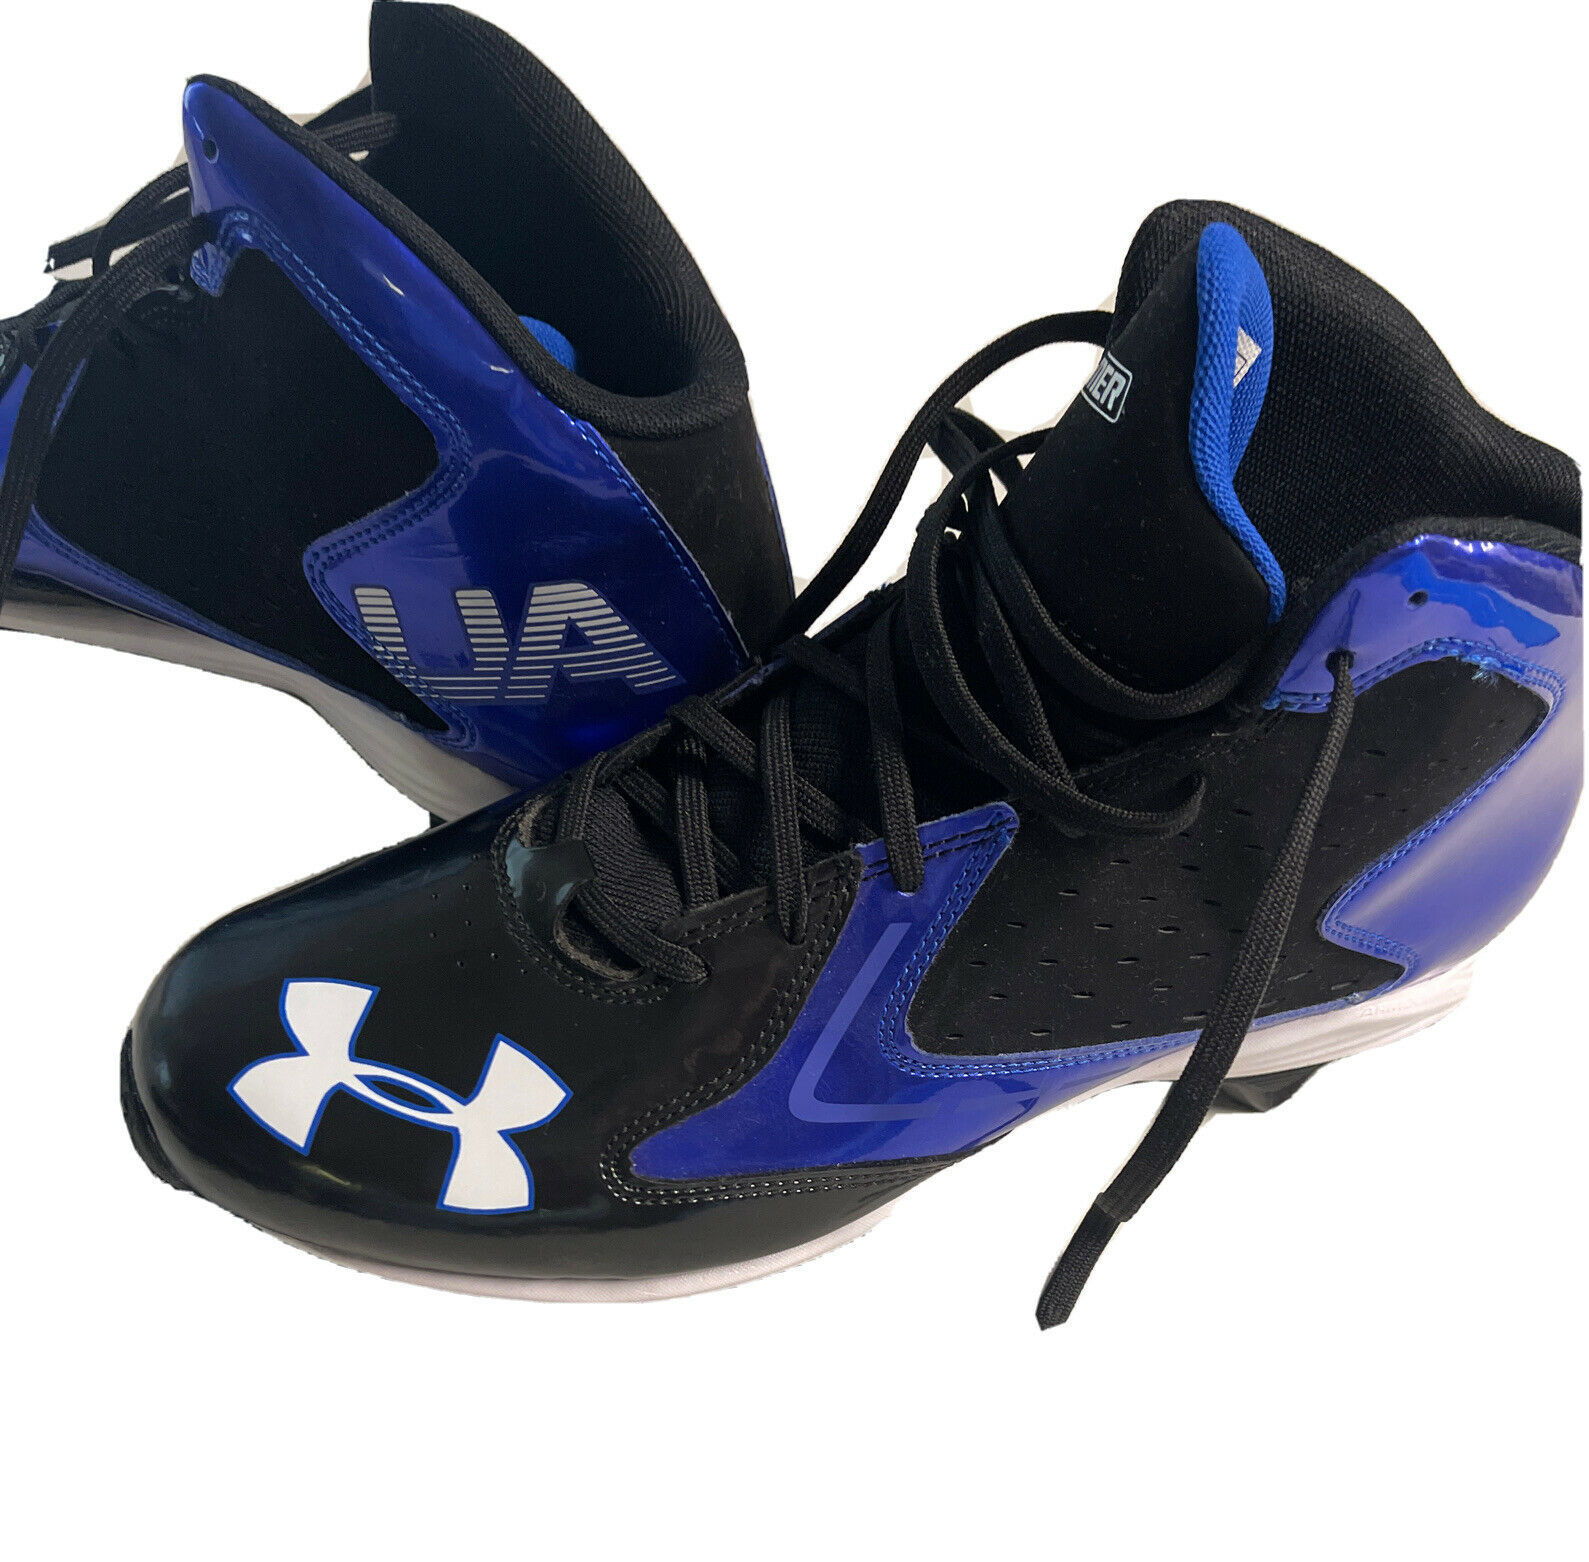 Under Armour Hammer Football Cleats Shoes Blue Black Size 11.5 New! - $29.64